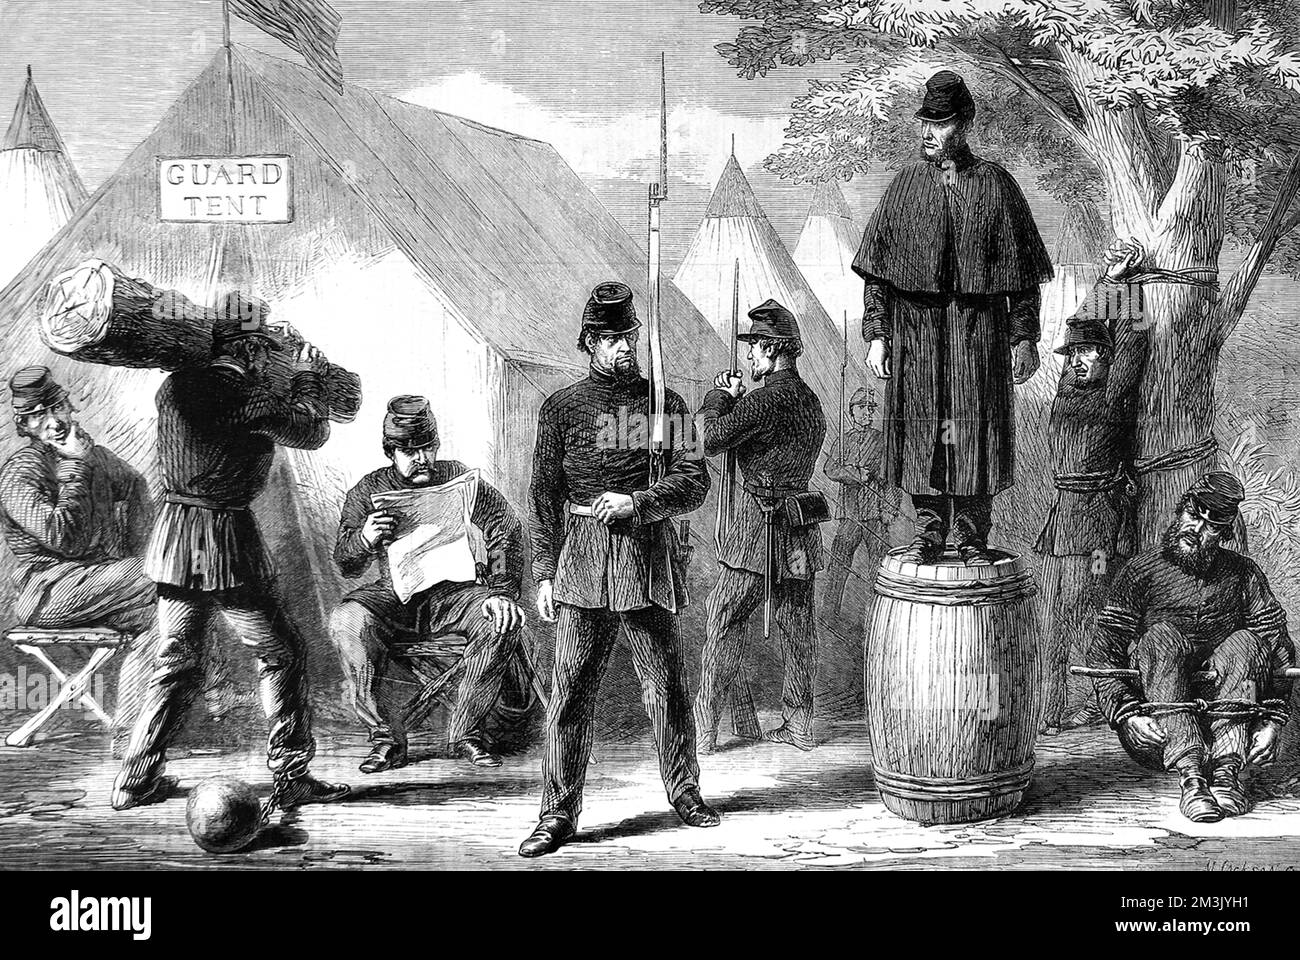 Federal soldiers patrolling and keeping guard over  prisoners. One is tied to a tree while another is seated on the ground tied to a post.     Date: 1861 Stock Photo